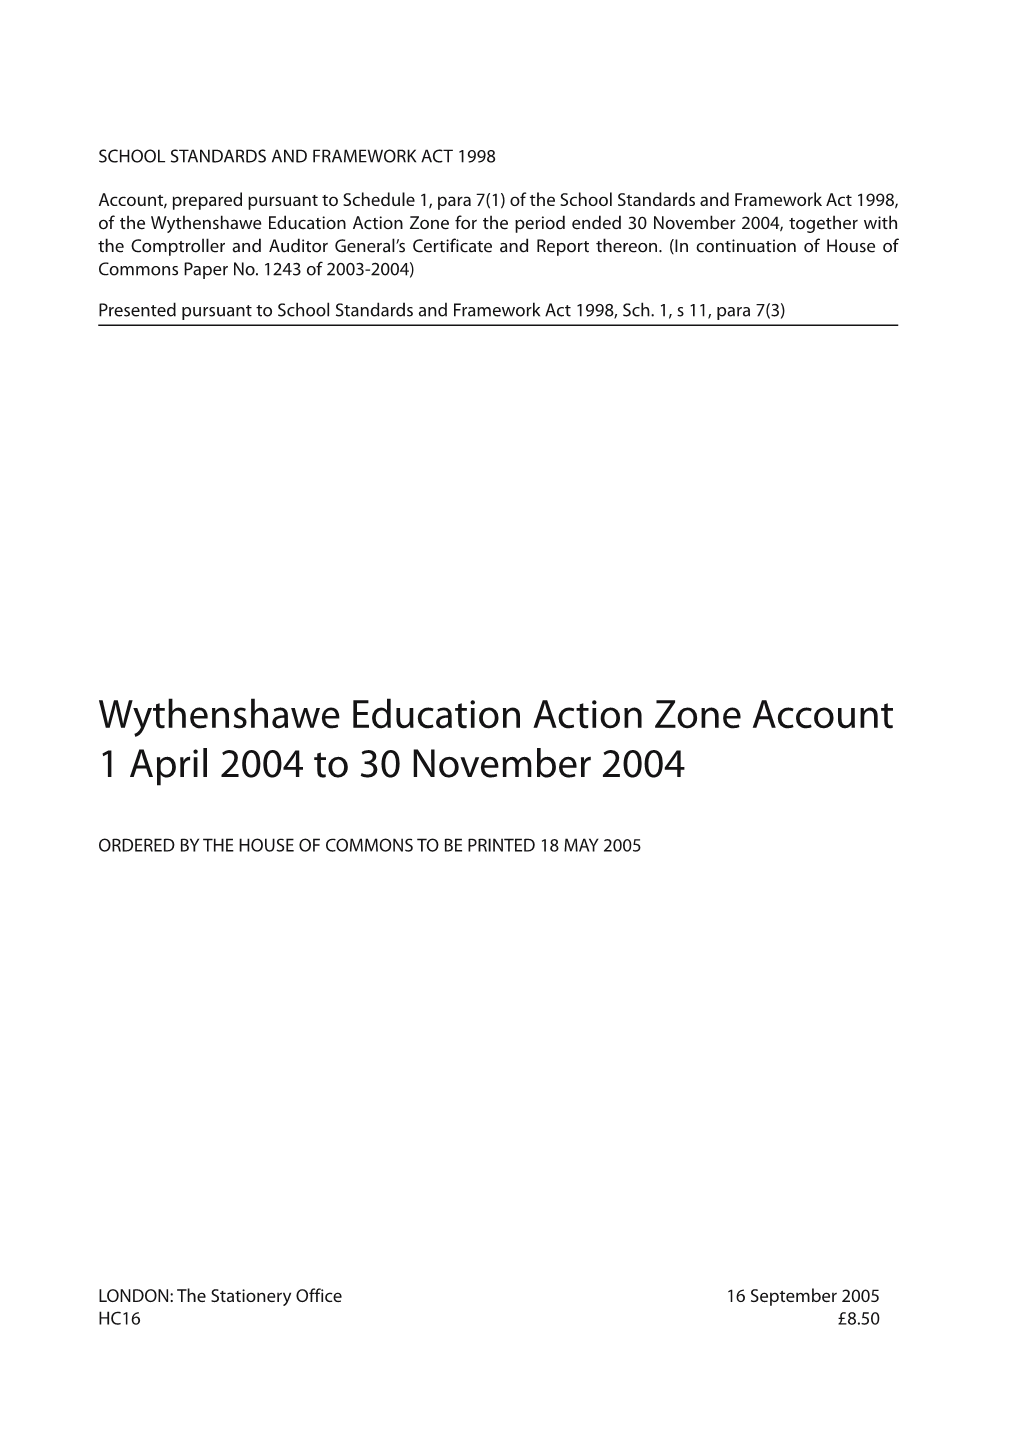 Wythenshawe Education Action Zone Account 1 April 2004 to 30 November 2004